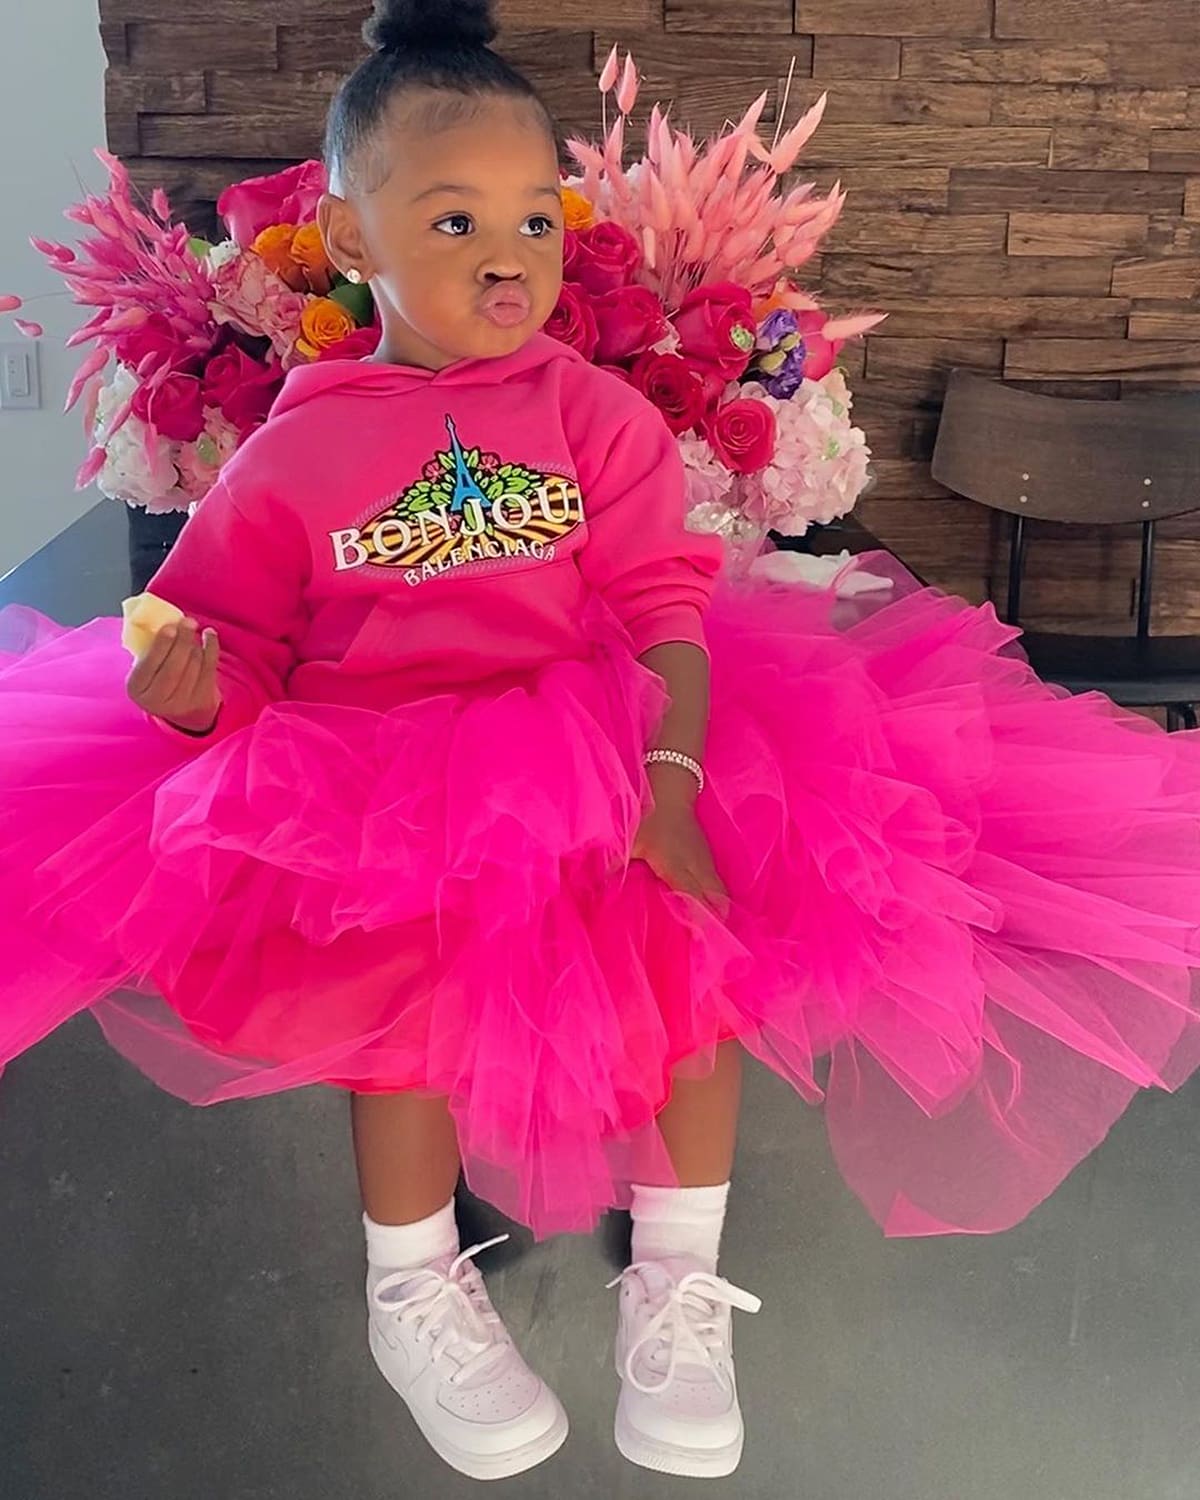 Offset Reveals A Gift For His And Cardi B's Daughter, Kulture That Blows Fans' Minds